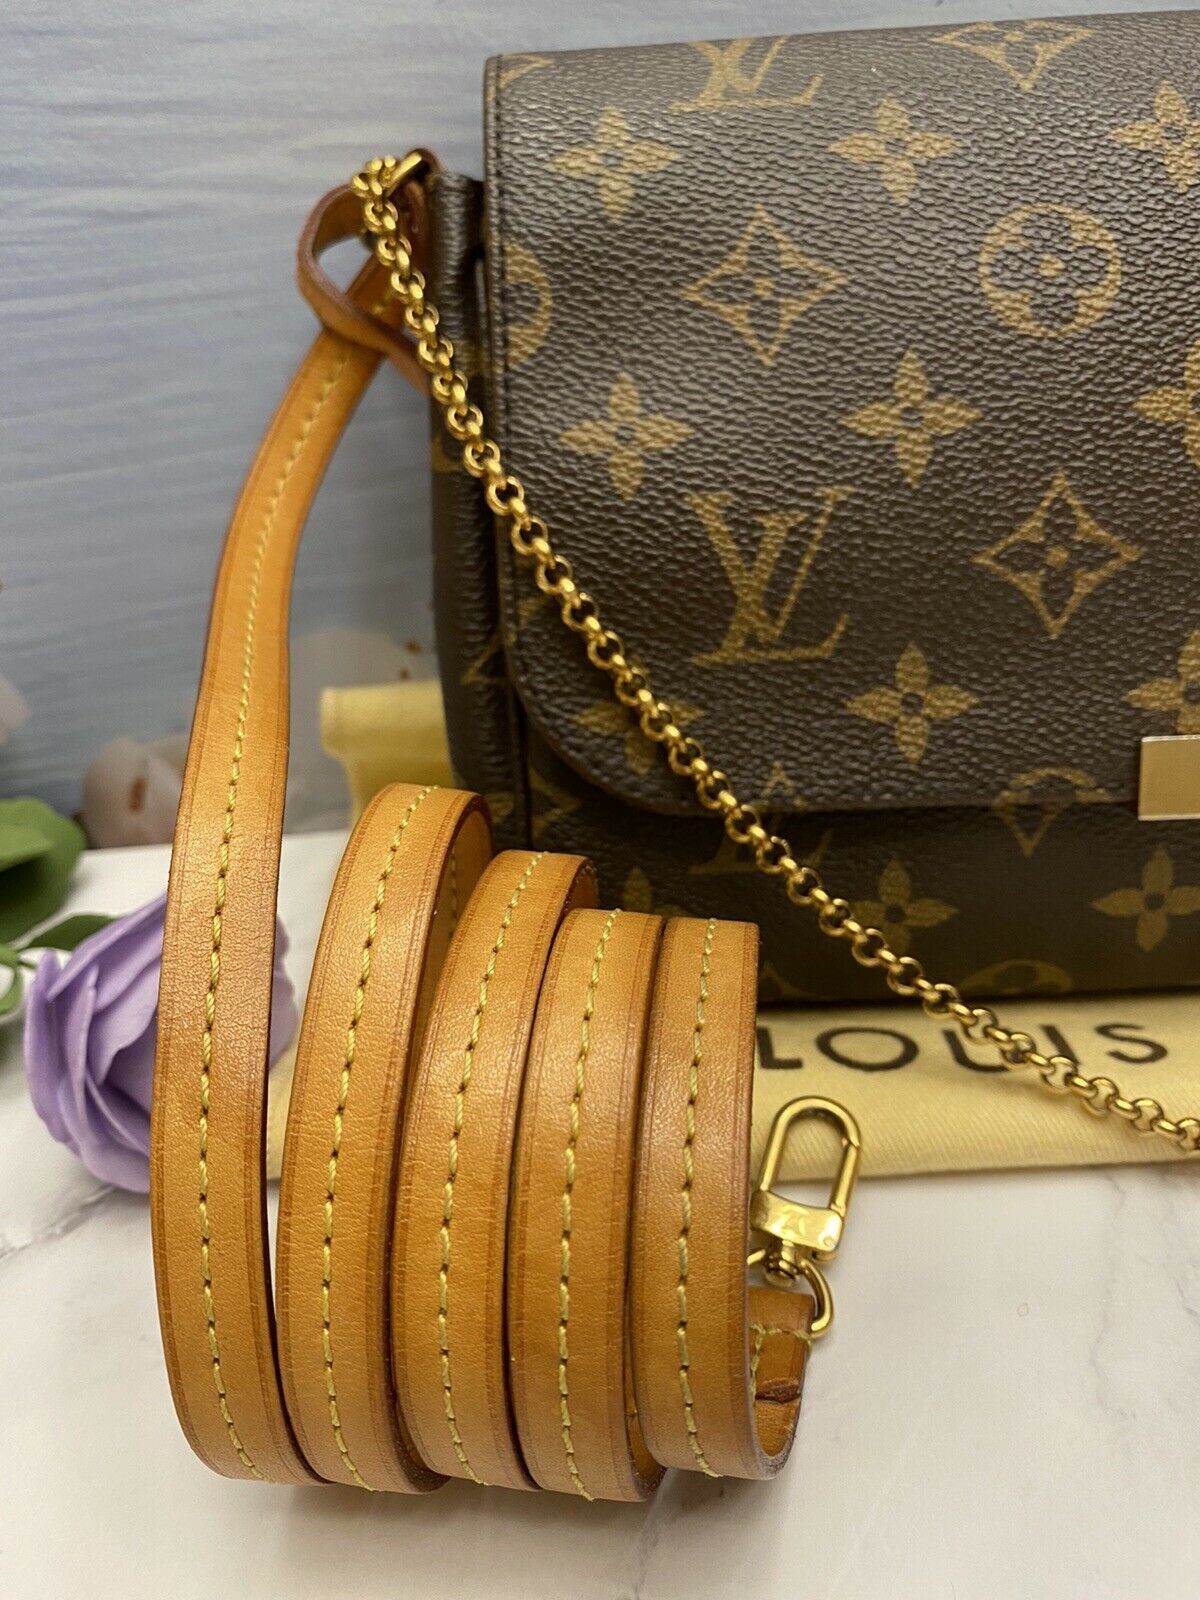 LOUIS VUITTON Heart on Chain Monogram Embossed Crossbody Bag Red - Fin